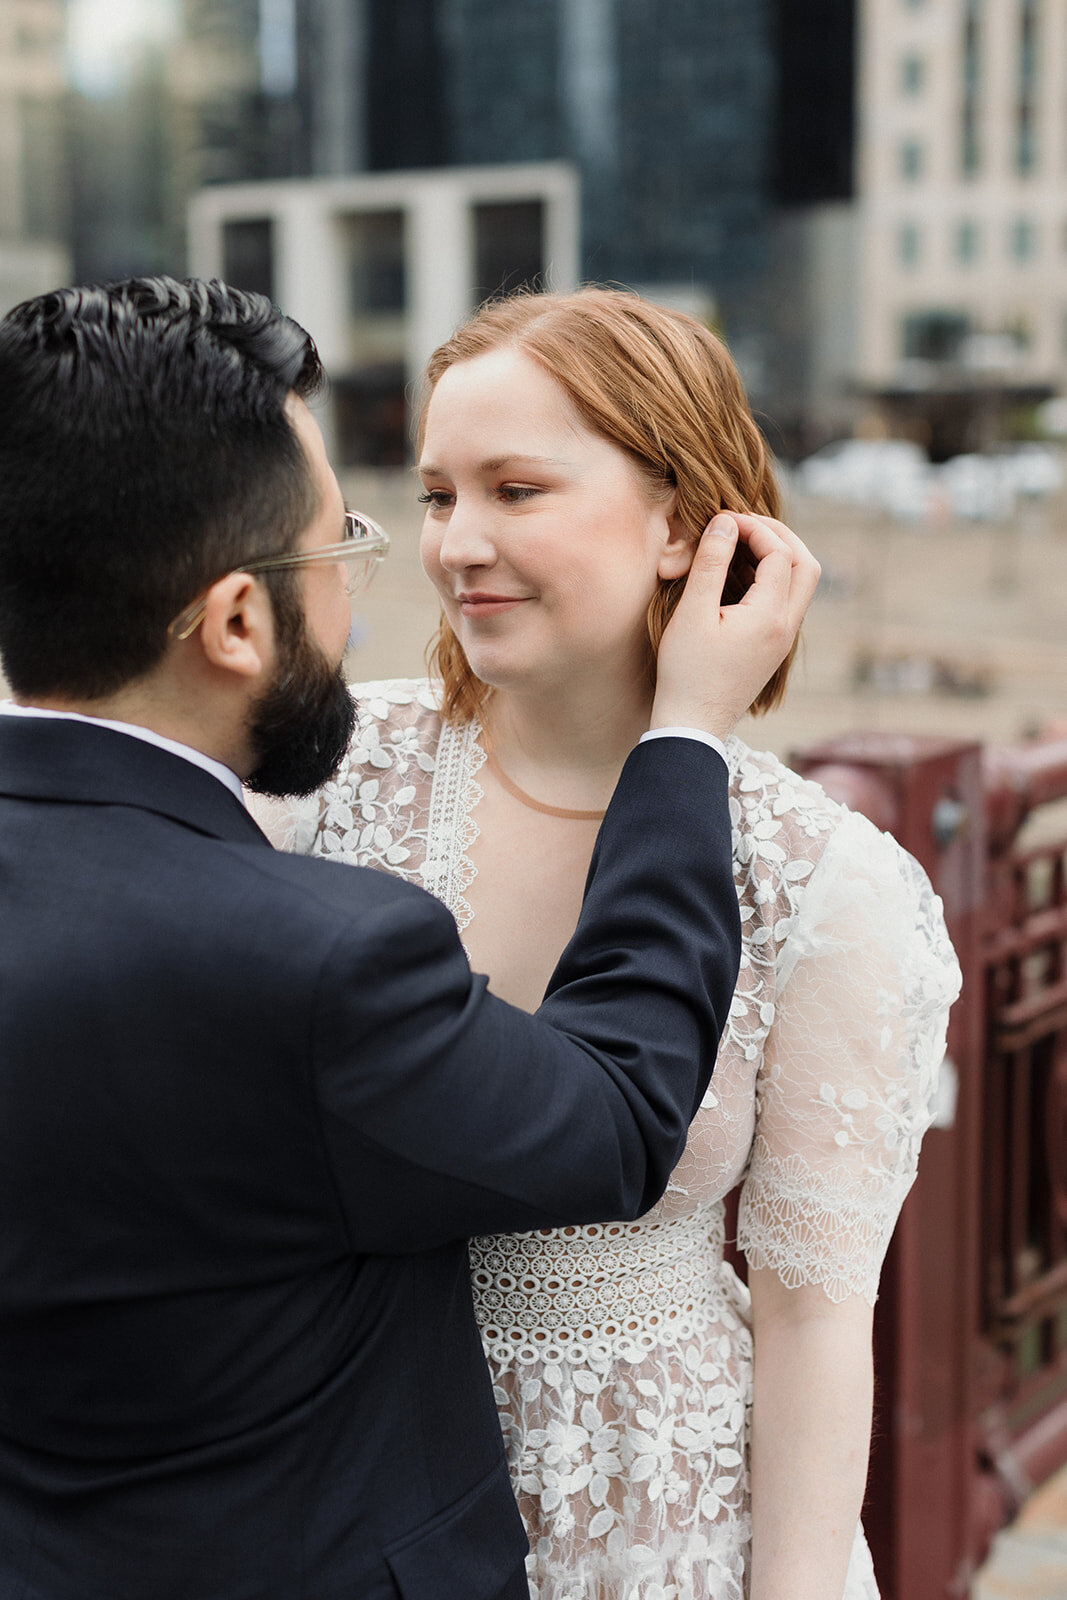 Wedding couple standing on Chicago River bridge smiling at each other. Groom is tucking bride's hair behind her ear.